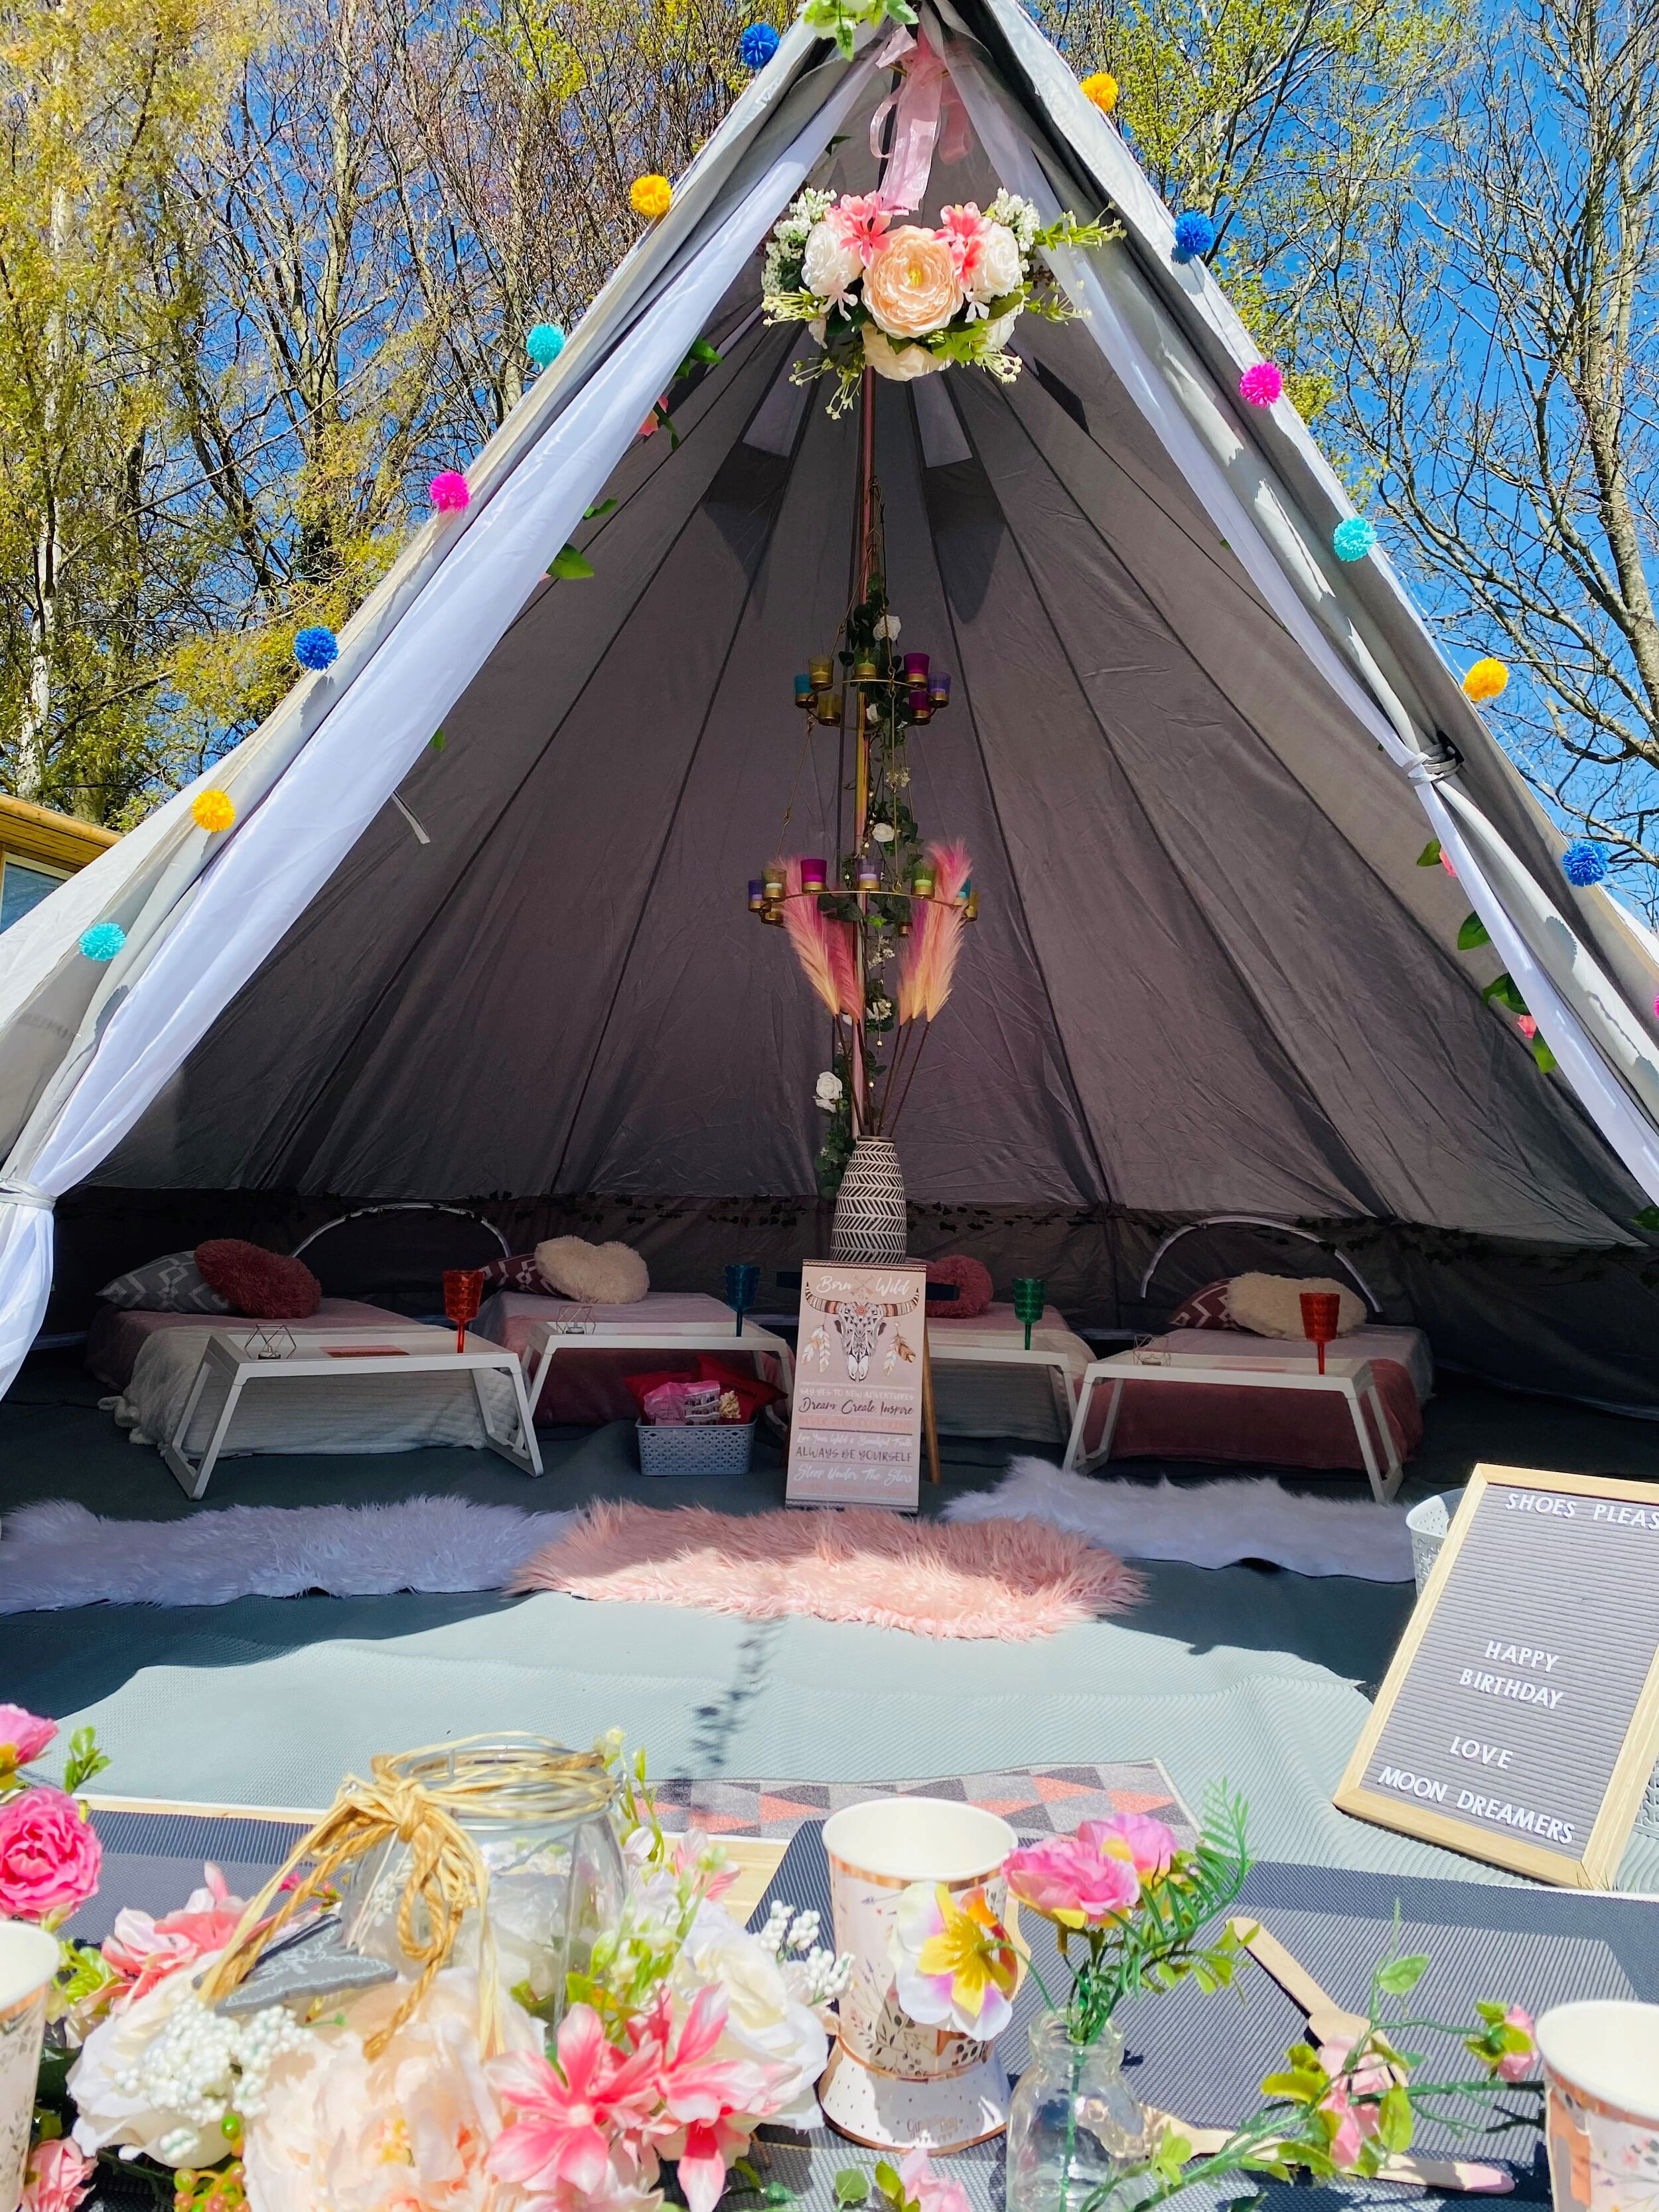 Moon Dreamers Teepee - Sleepover Party Tents in East Sussex